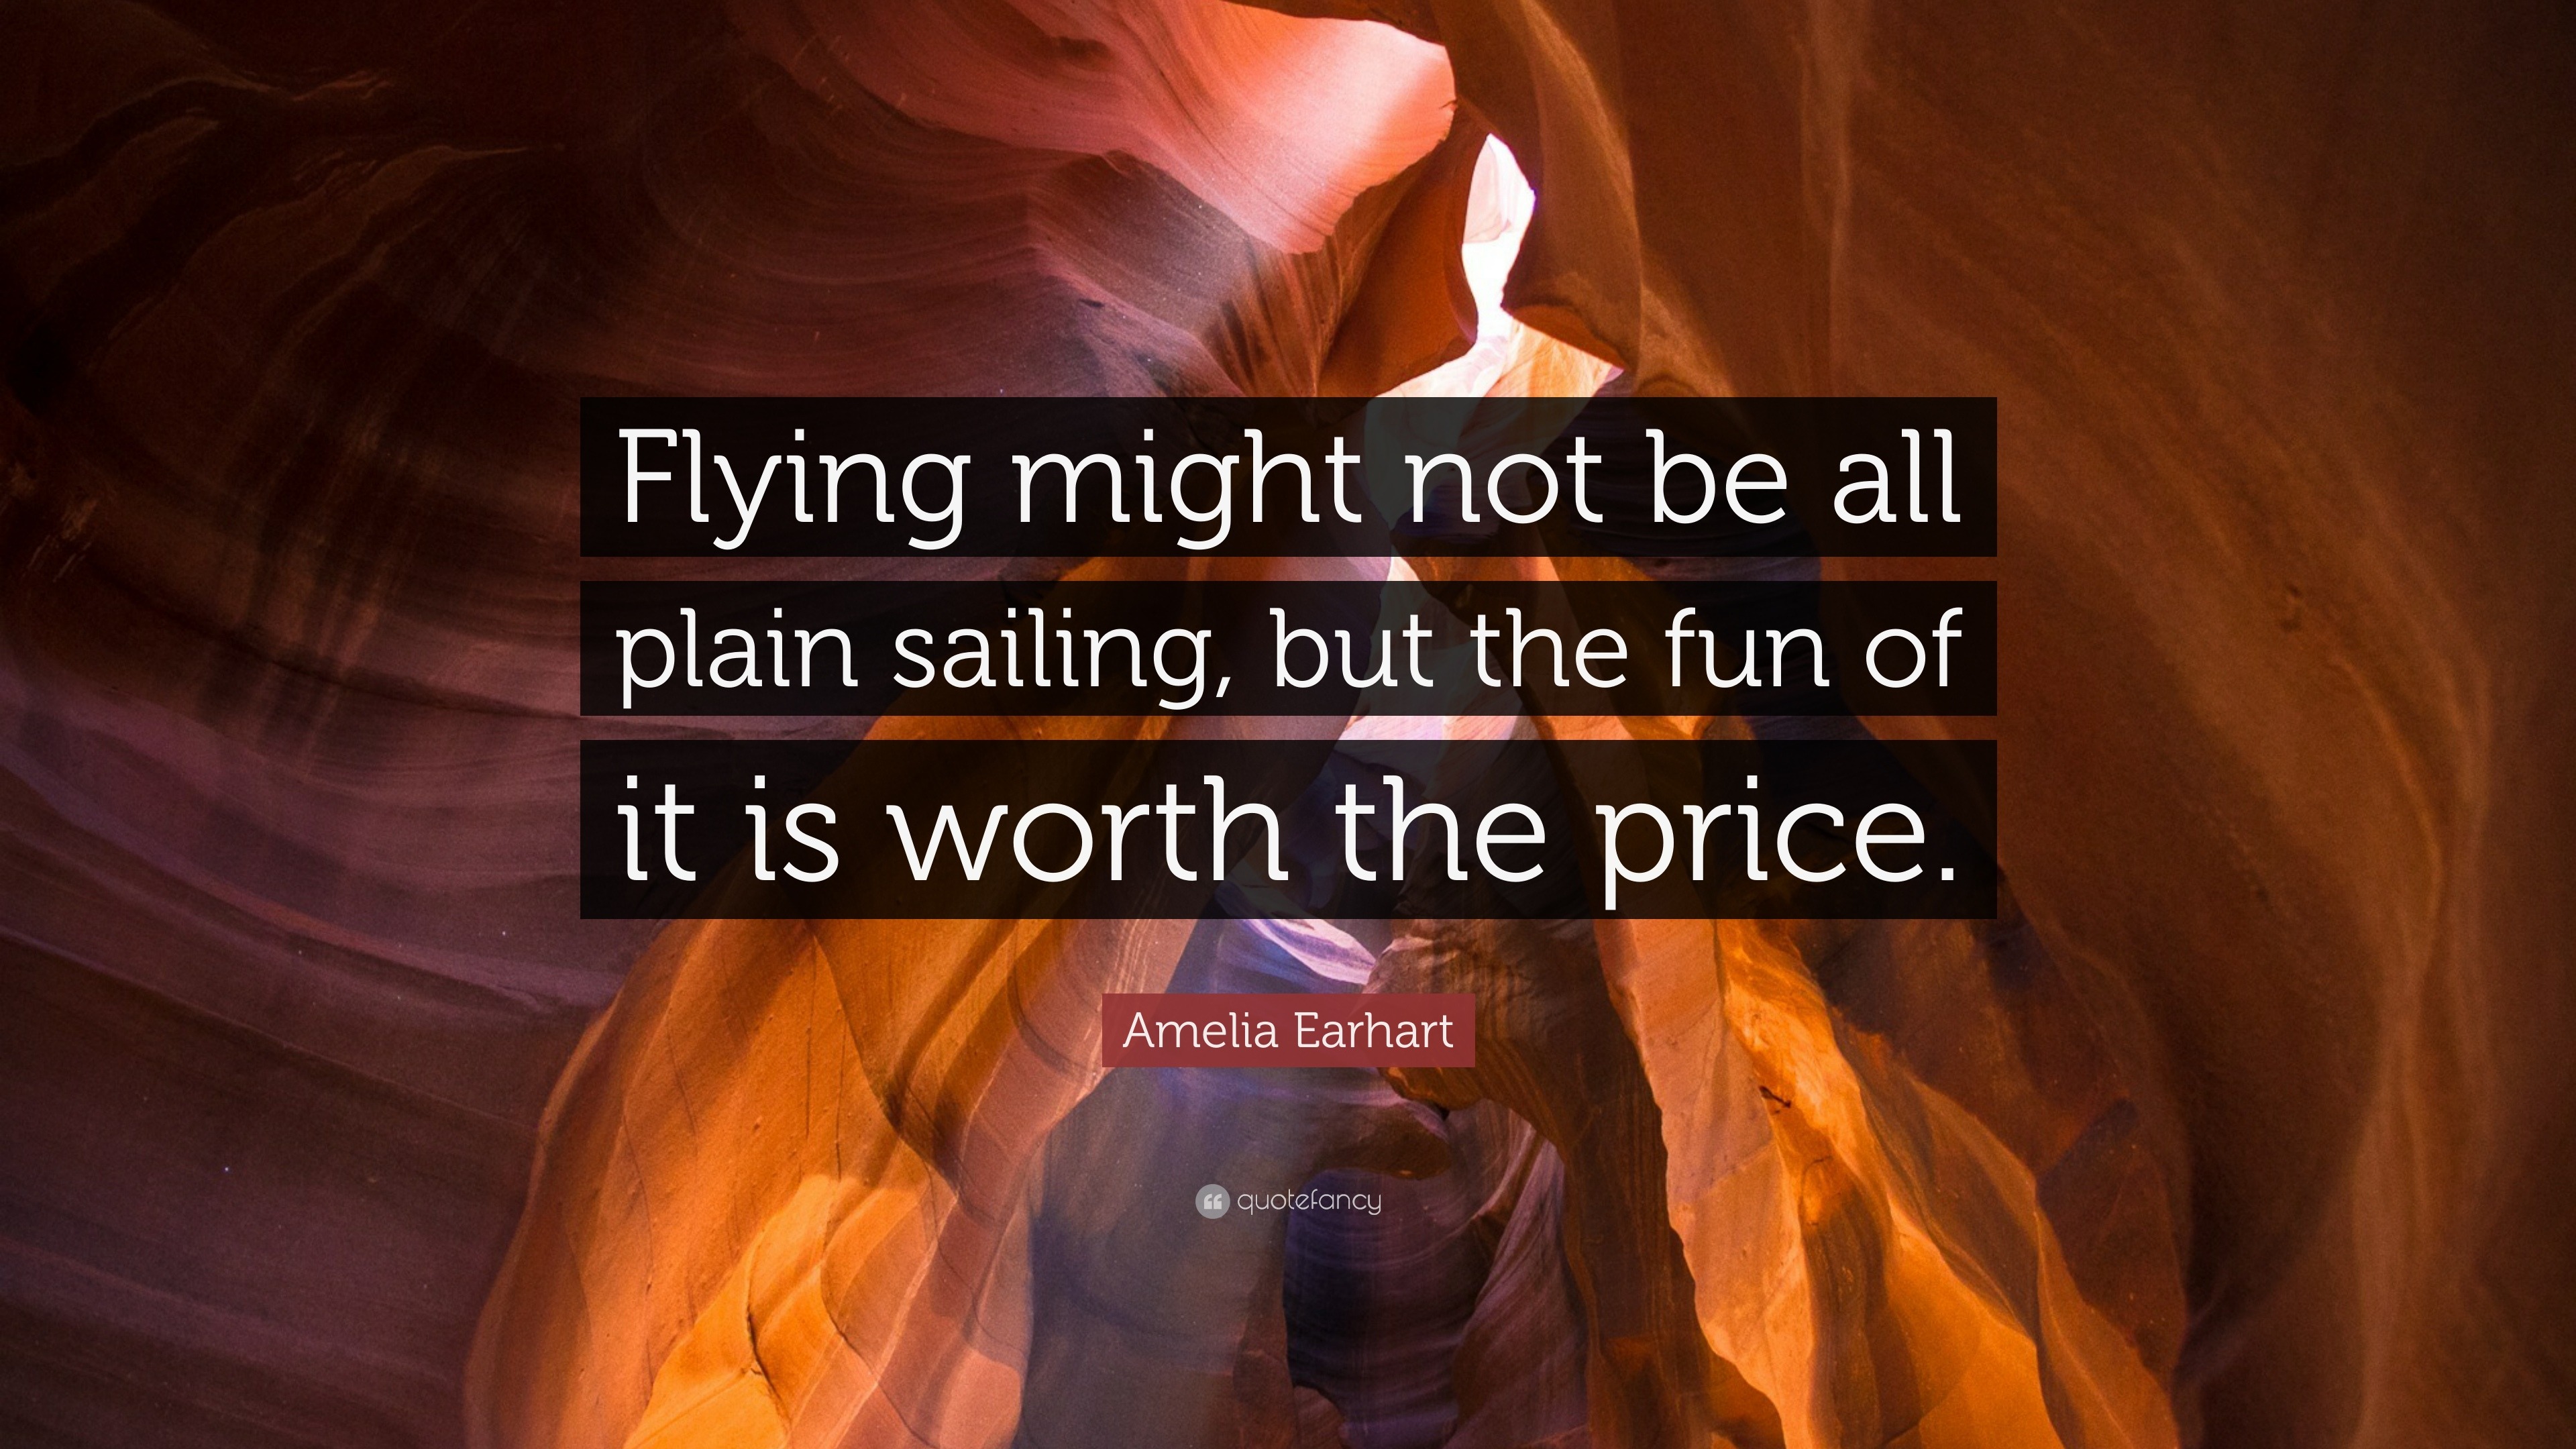 Amelia Earhart Quote: “Flying might not be all plain sailing, but